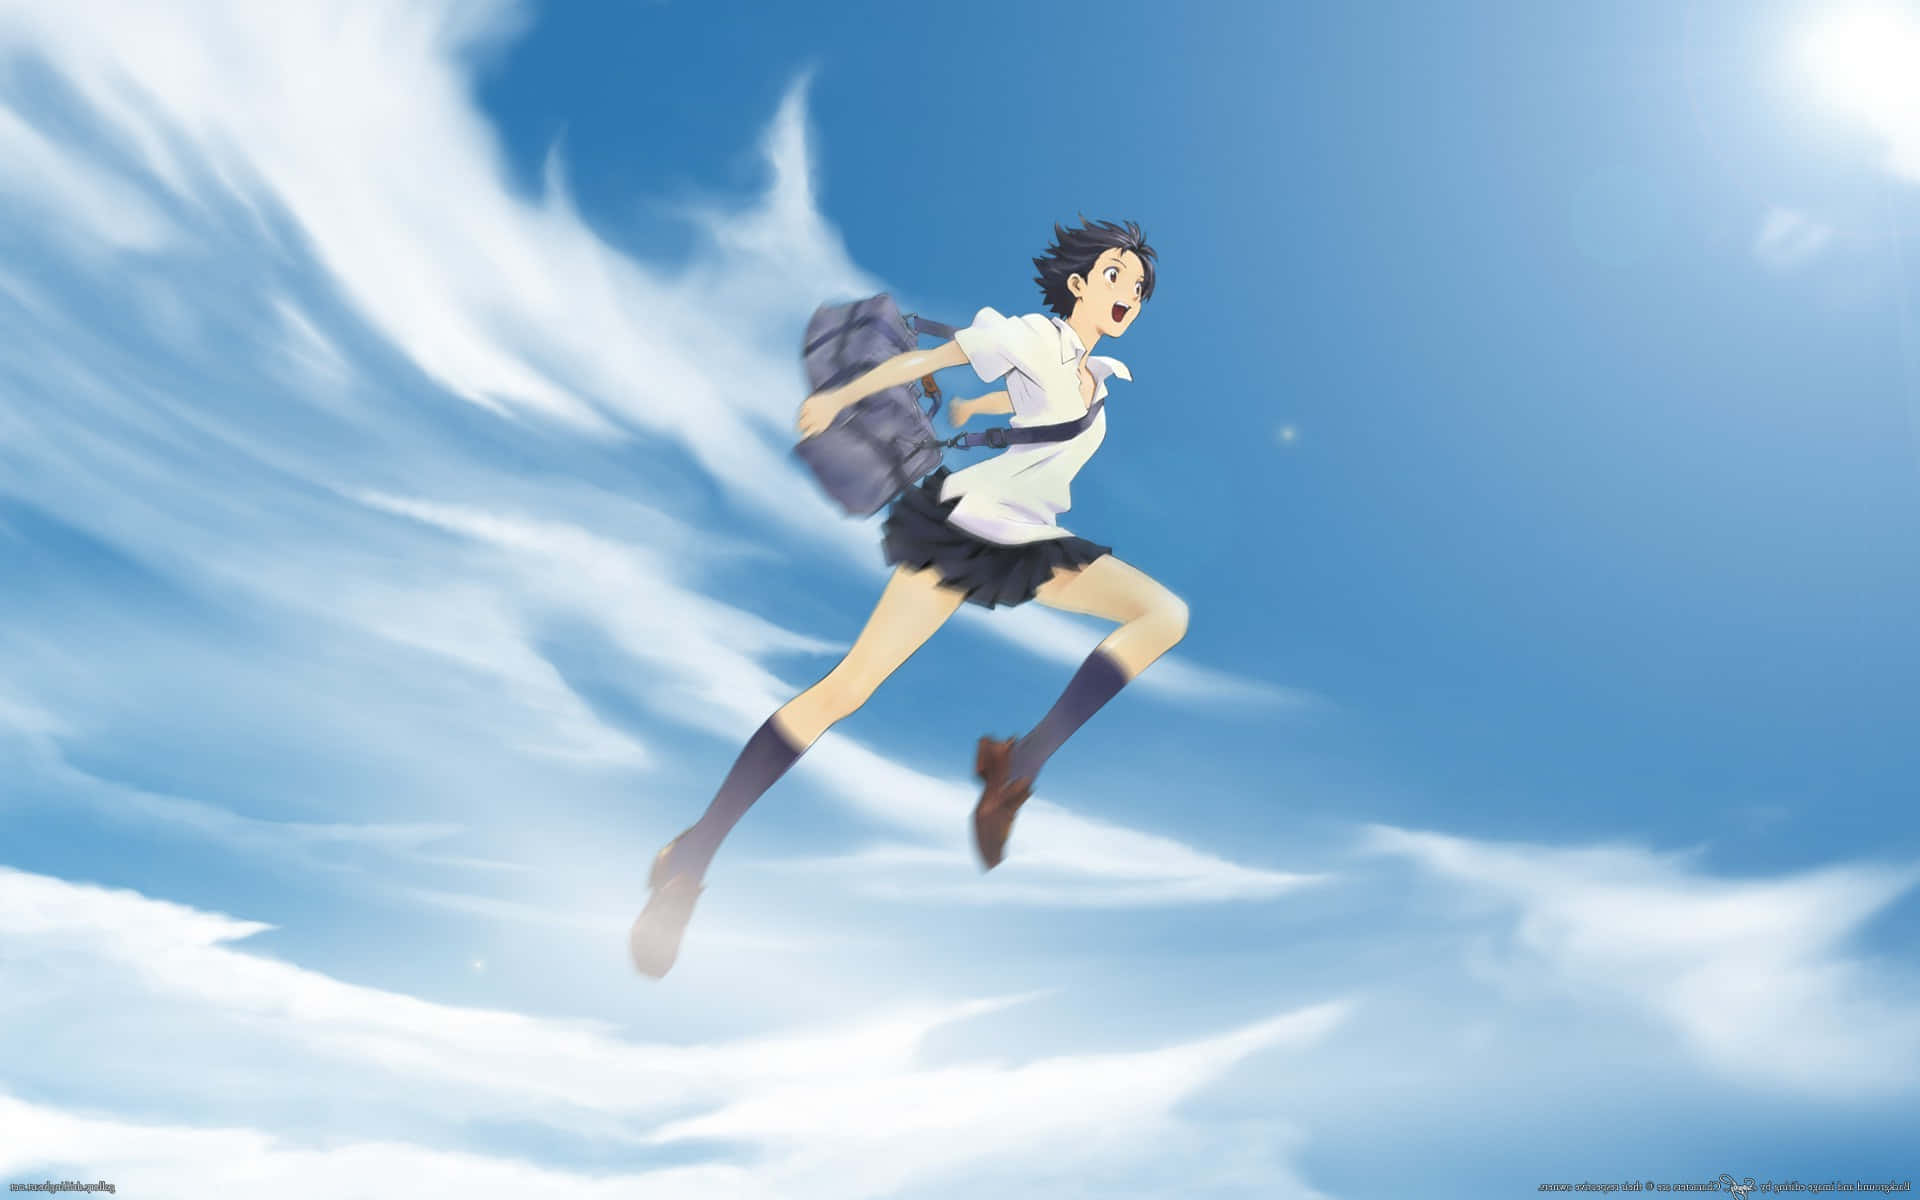 Makoto Konno embarks on a time-leaping journey in The Girl Who Leapt Through Time Wallpaper